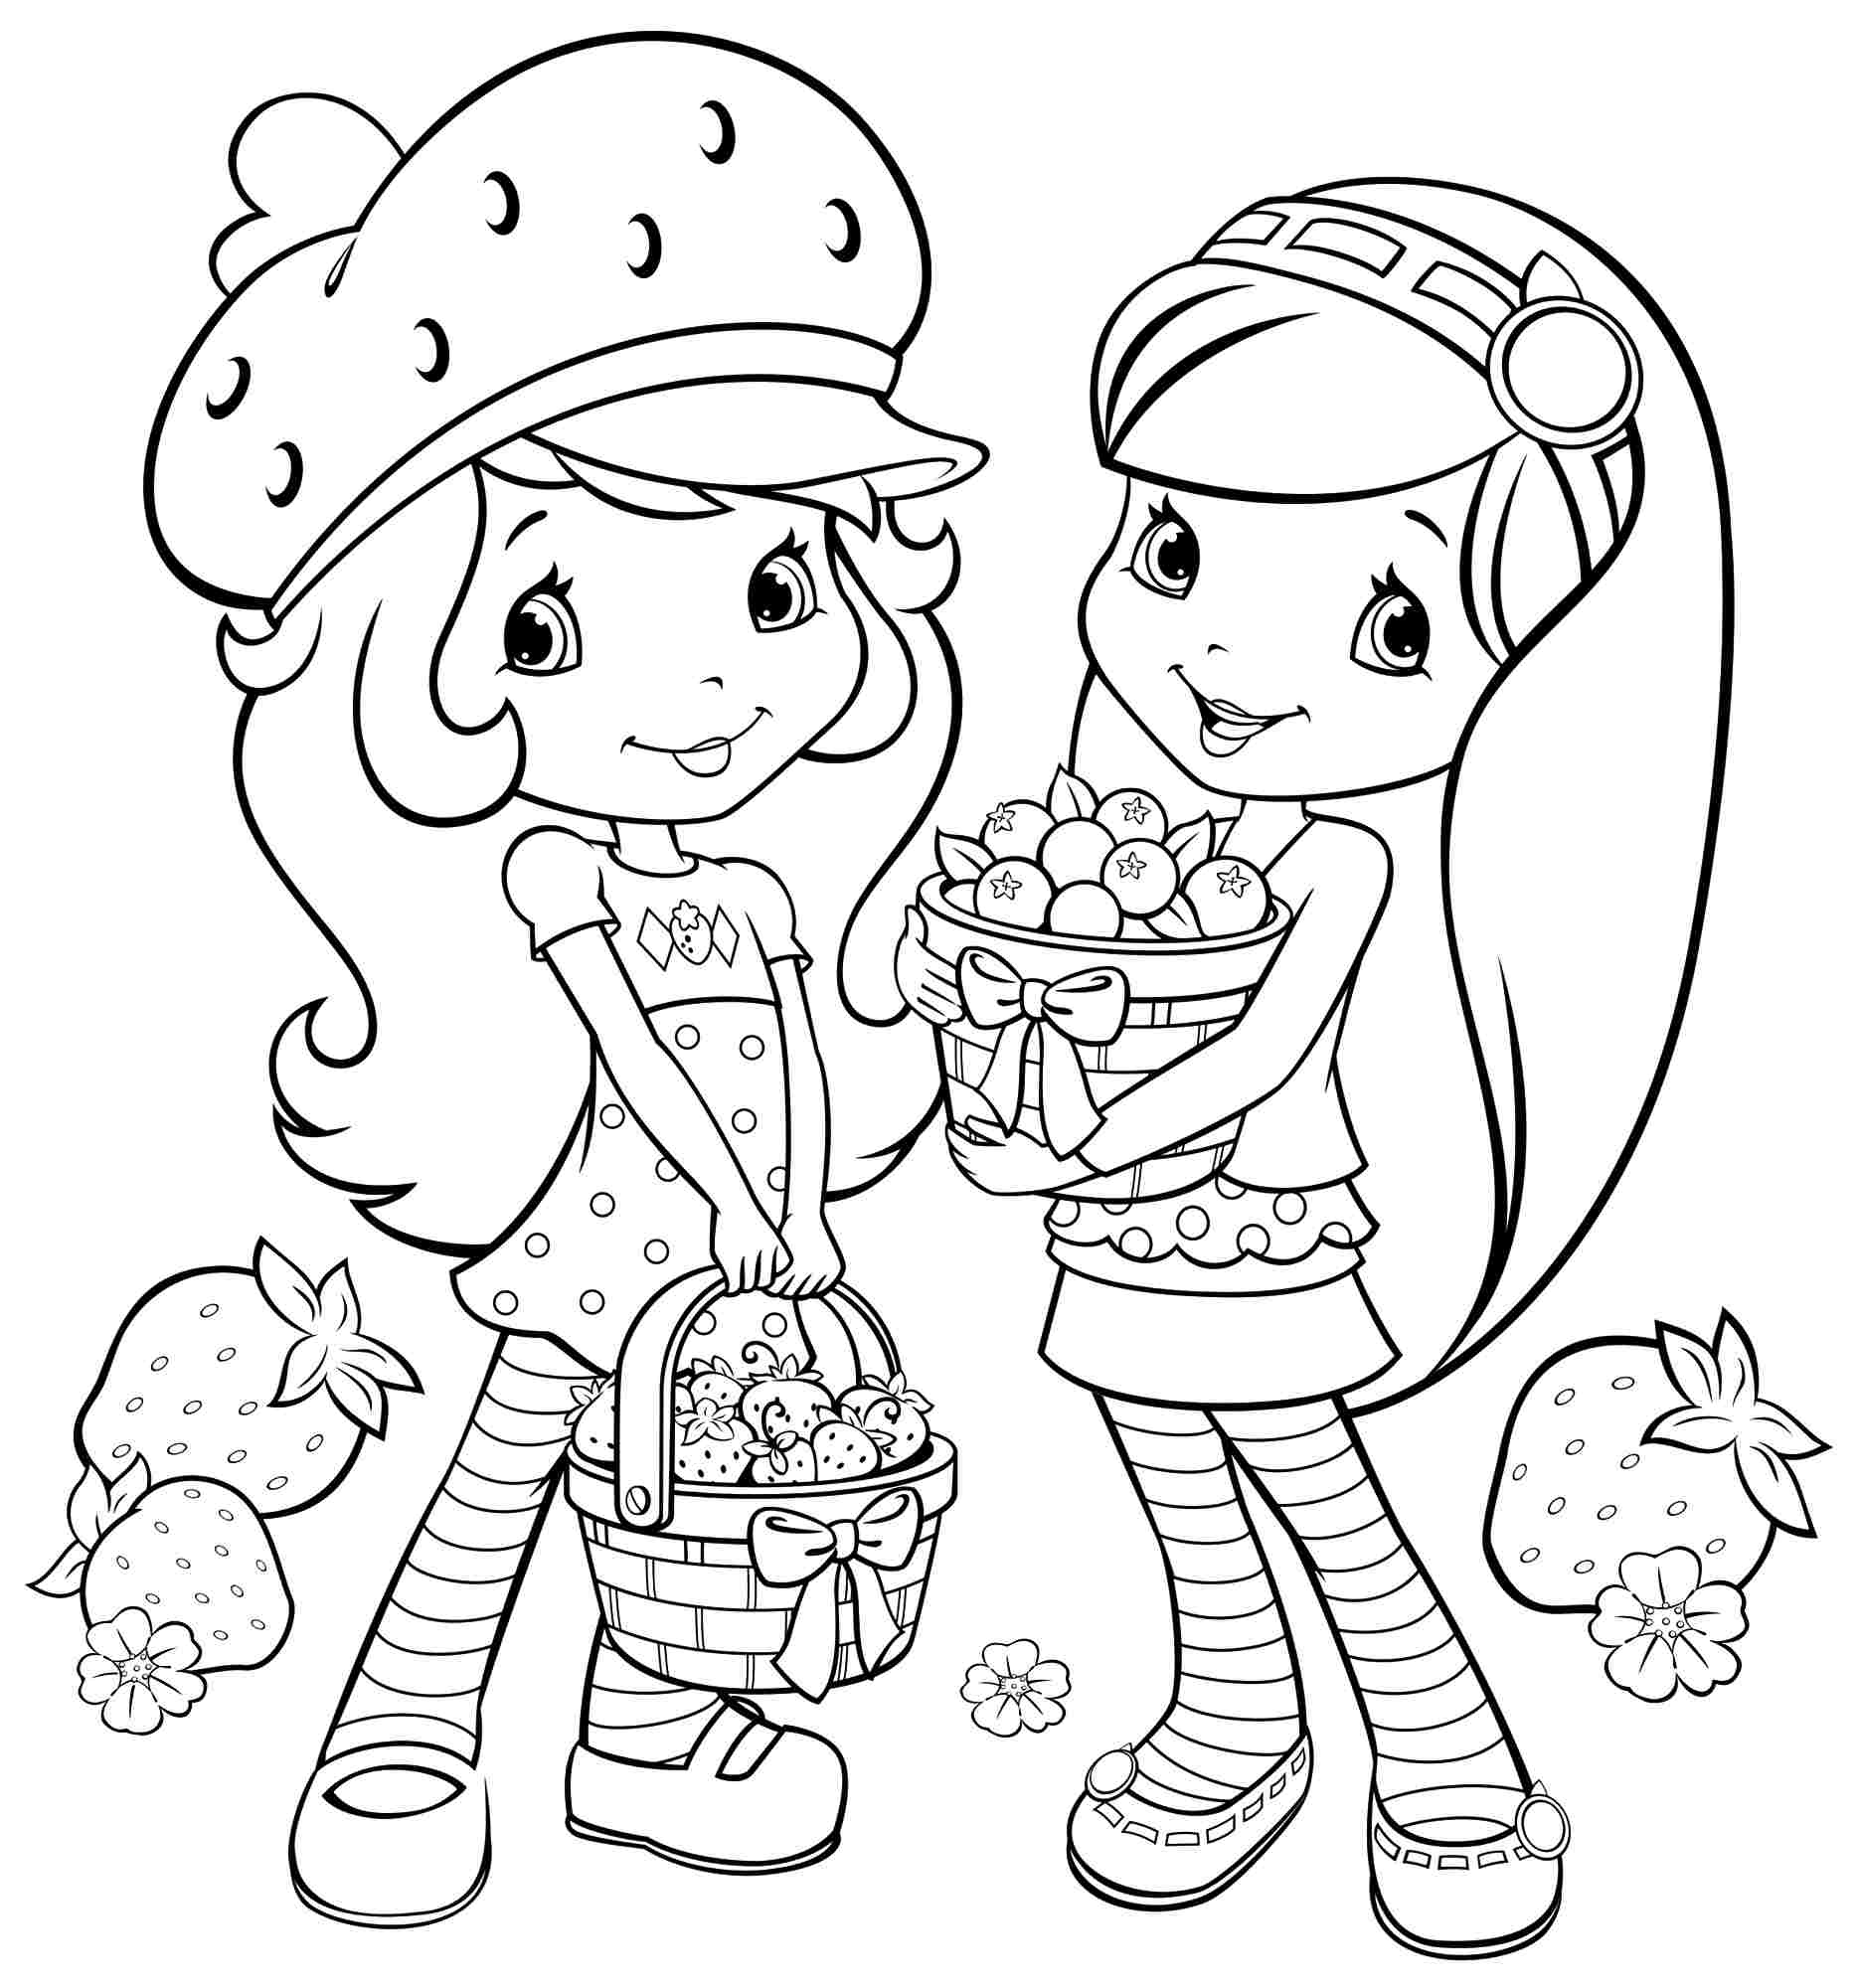 All Drawing Coloring Pages - Coloring Pages For All Ages